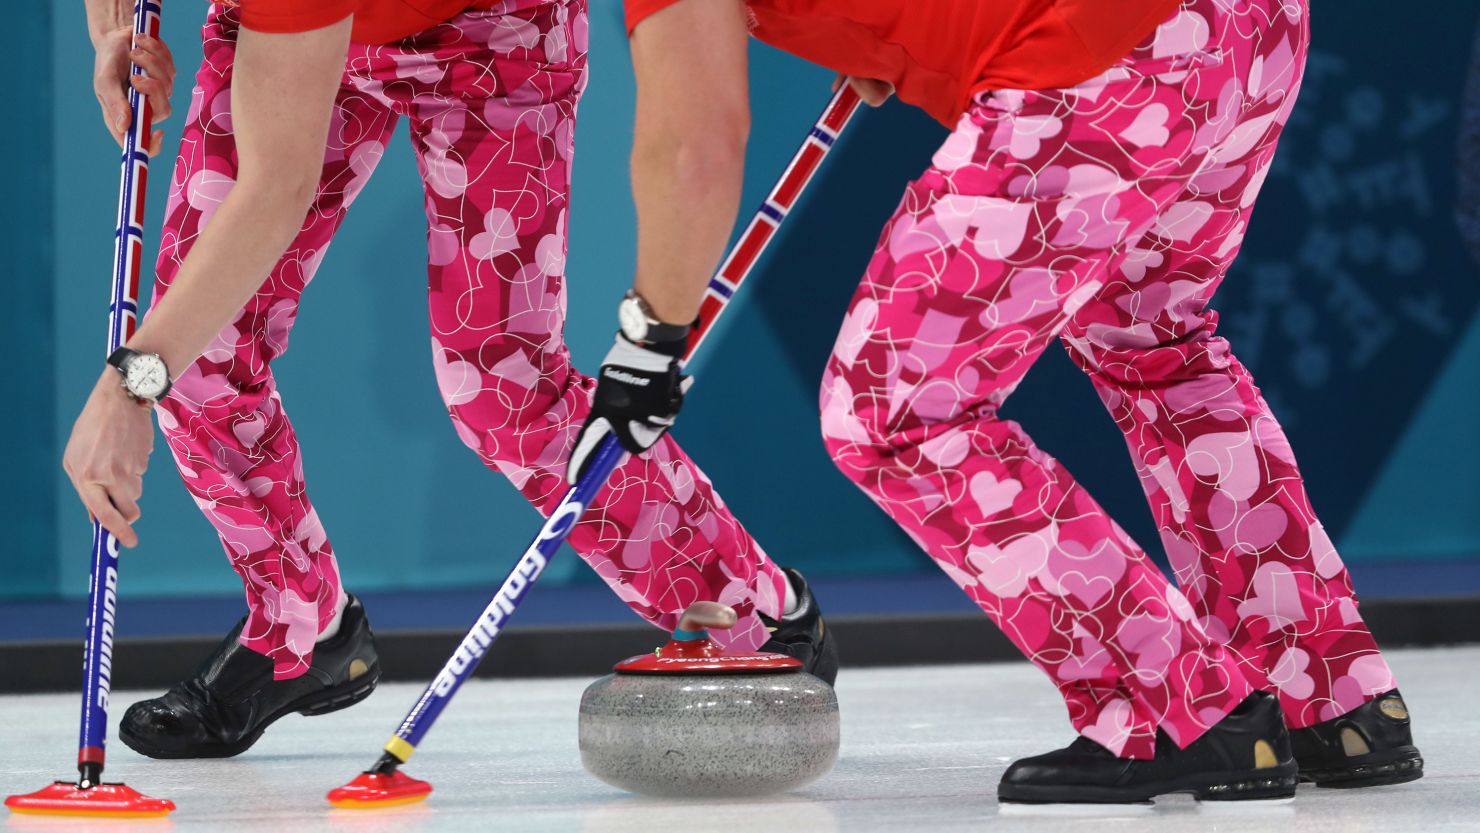 Cancel your relationship. The Norwegian curling team is your